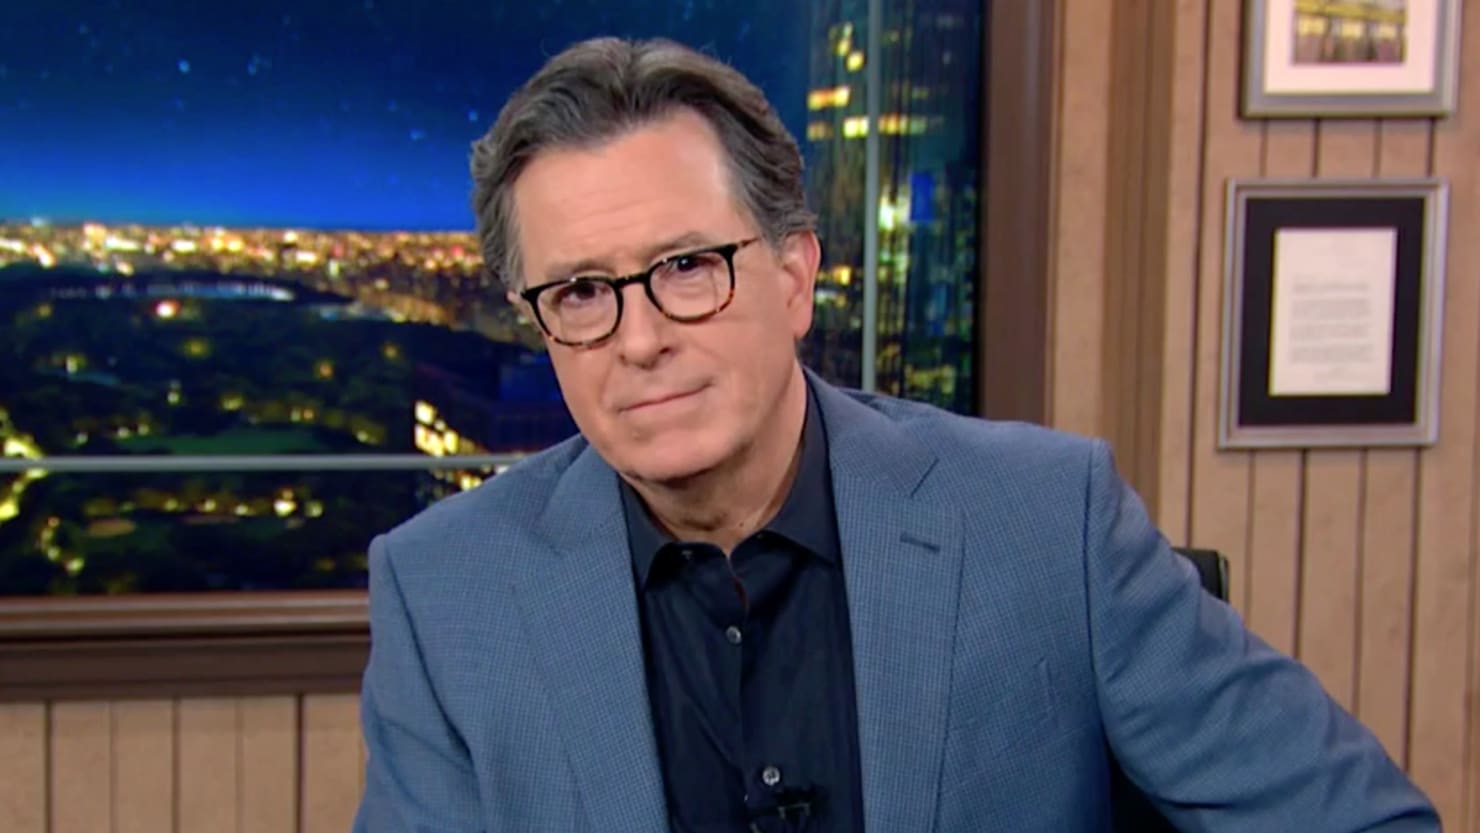 Stephen Colbert Gets Emotional About President Biden, Says ‘I Have No Gloat in Me’